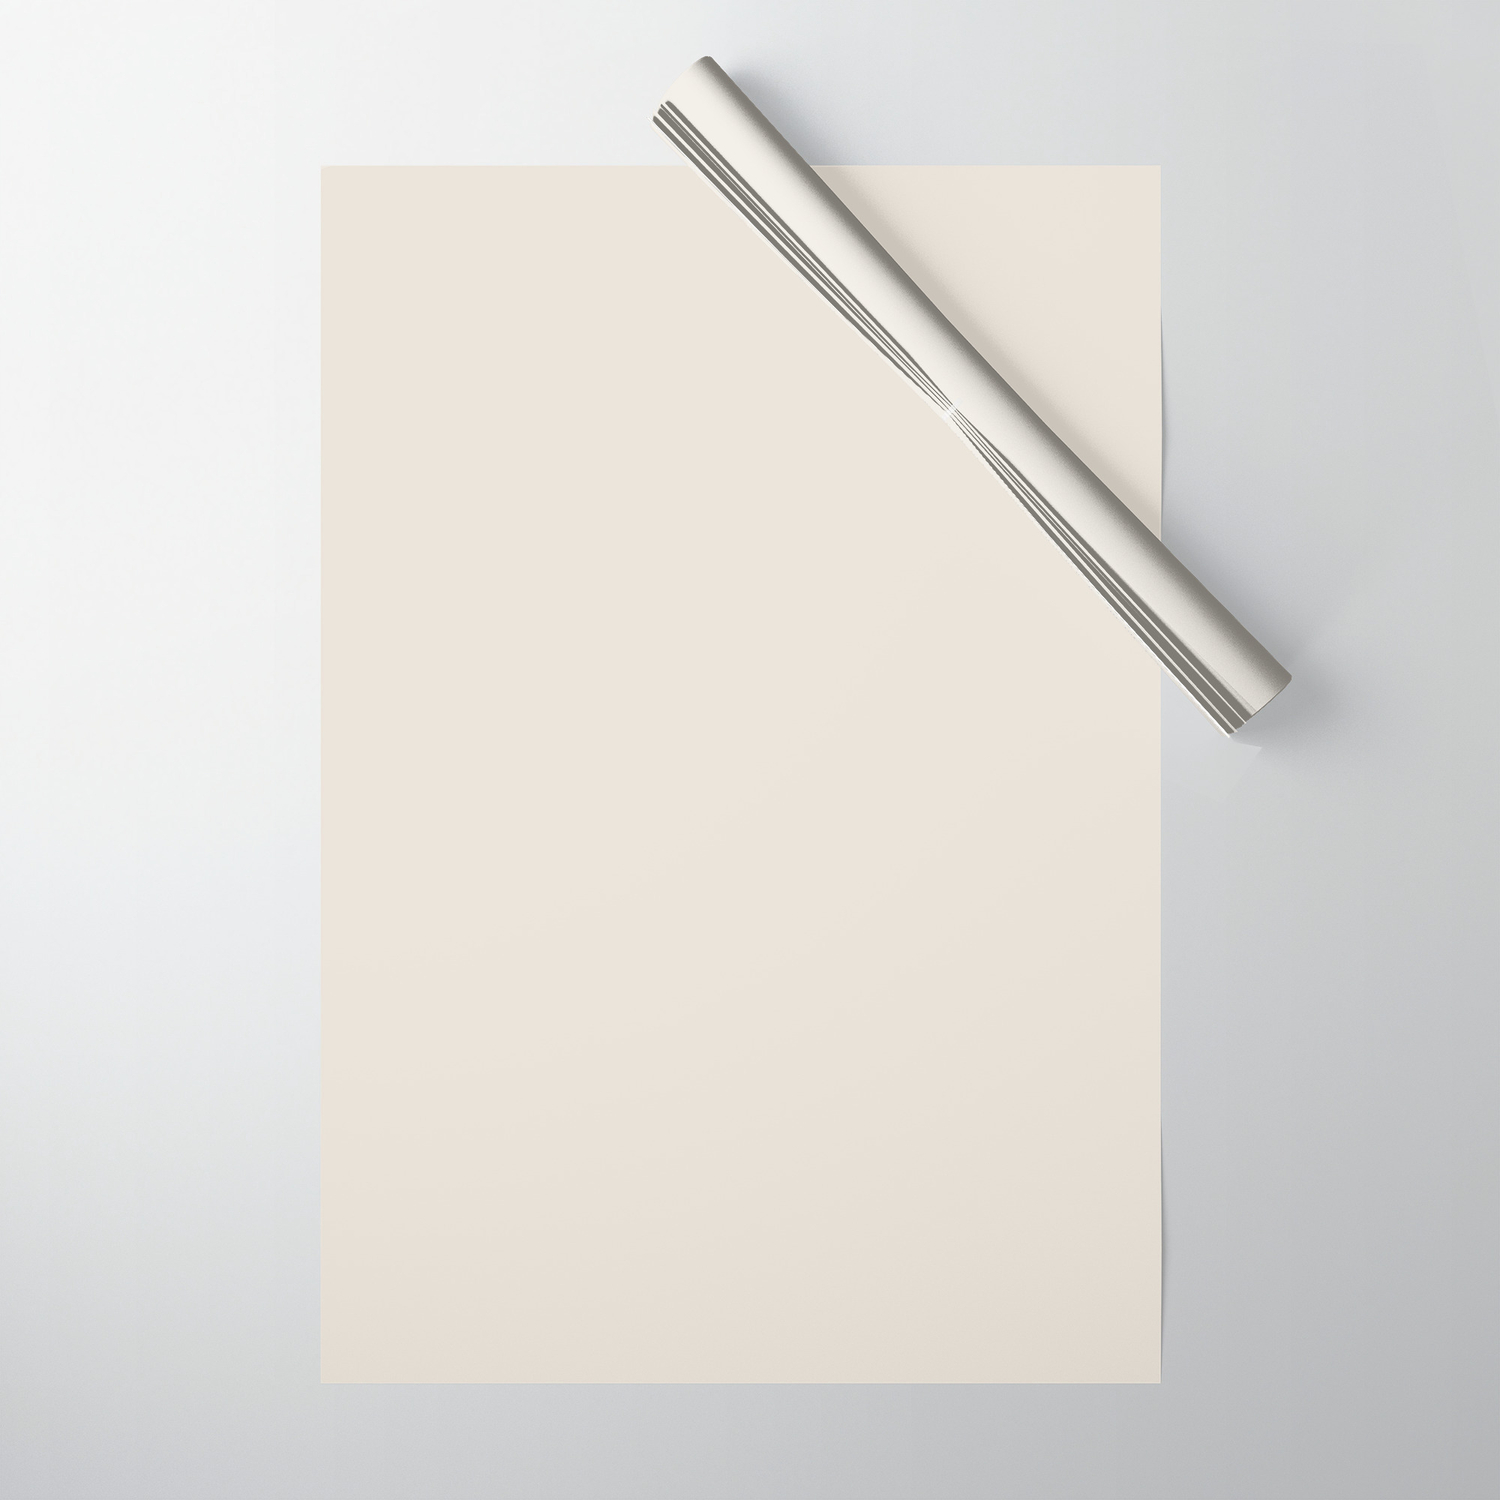 Best Seller Sherwin Williams Colors of 2019 Porcelain (Off White Cream Ivory) 0053 Solid Color Wrapping Paper by Simply Solids_Solid Colors_Single Shades | Society6